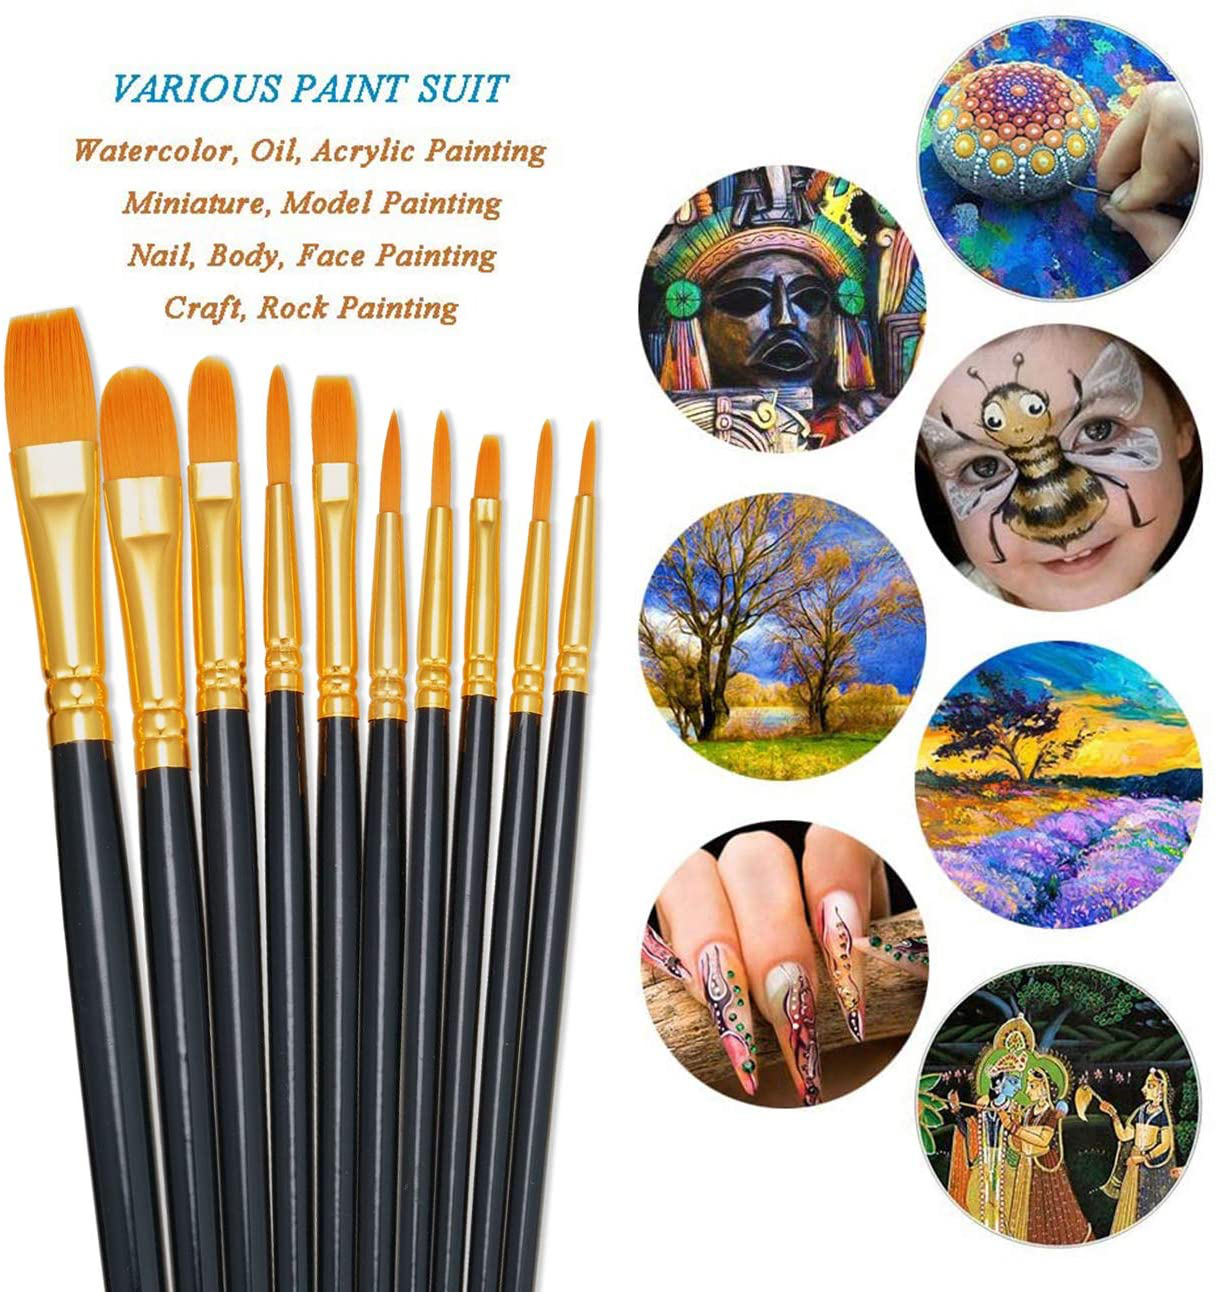 BOSOBO Paint Brushes Set, 2 Pack 20 Pcs Round Pointed Tip Paintbrushes Nylon Hair Artist Acrylic Paint Brushes for Acrylic Oil Watercolor, Face Nail Art, Miniature Detailing & Rock Painting